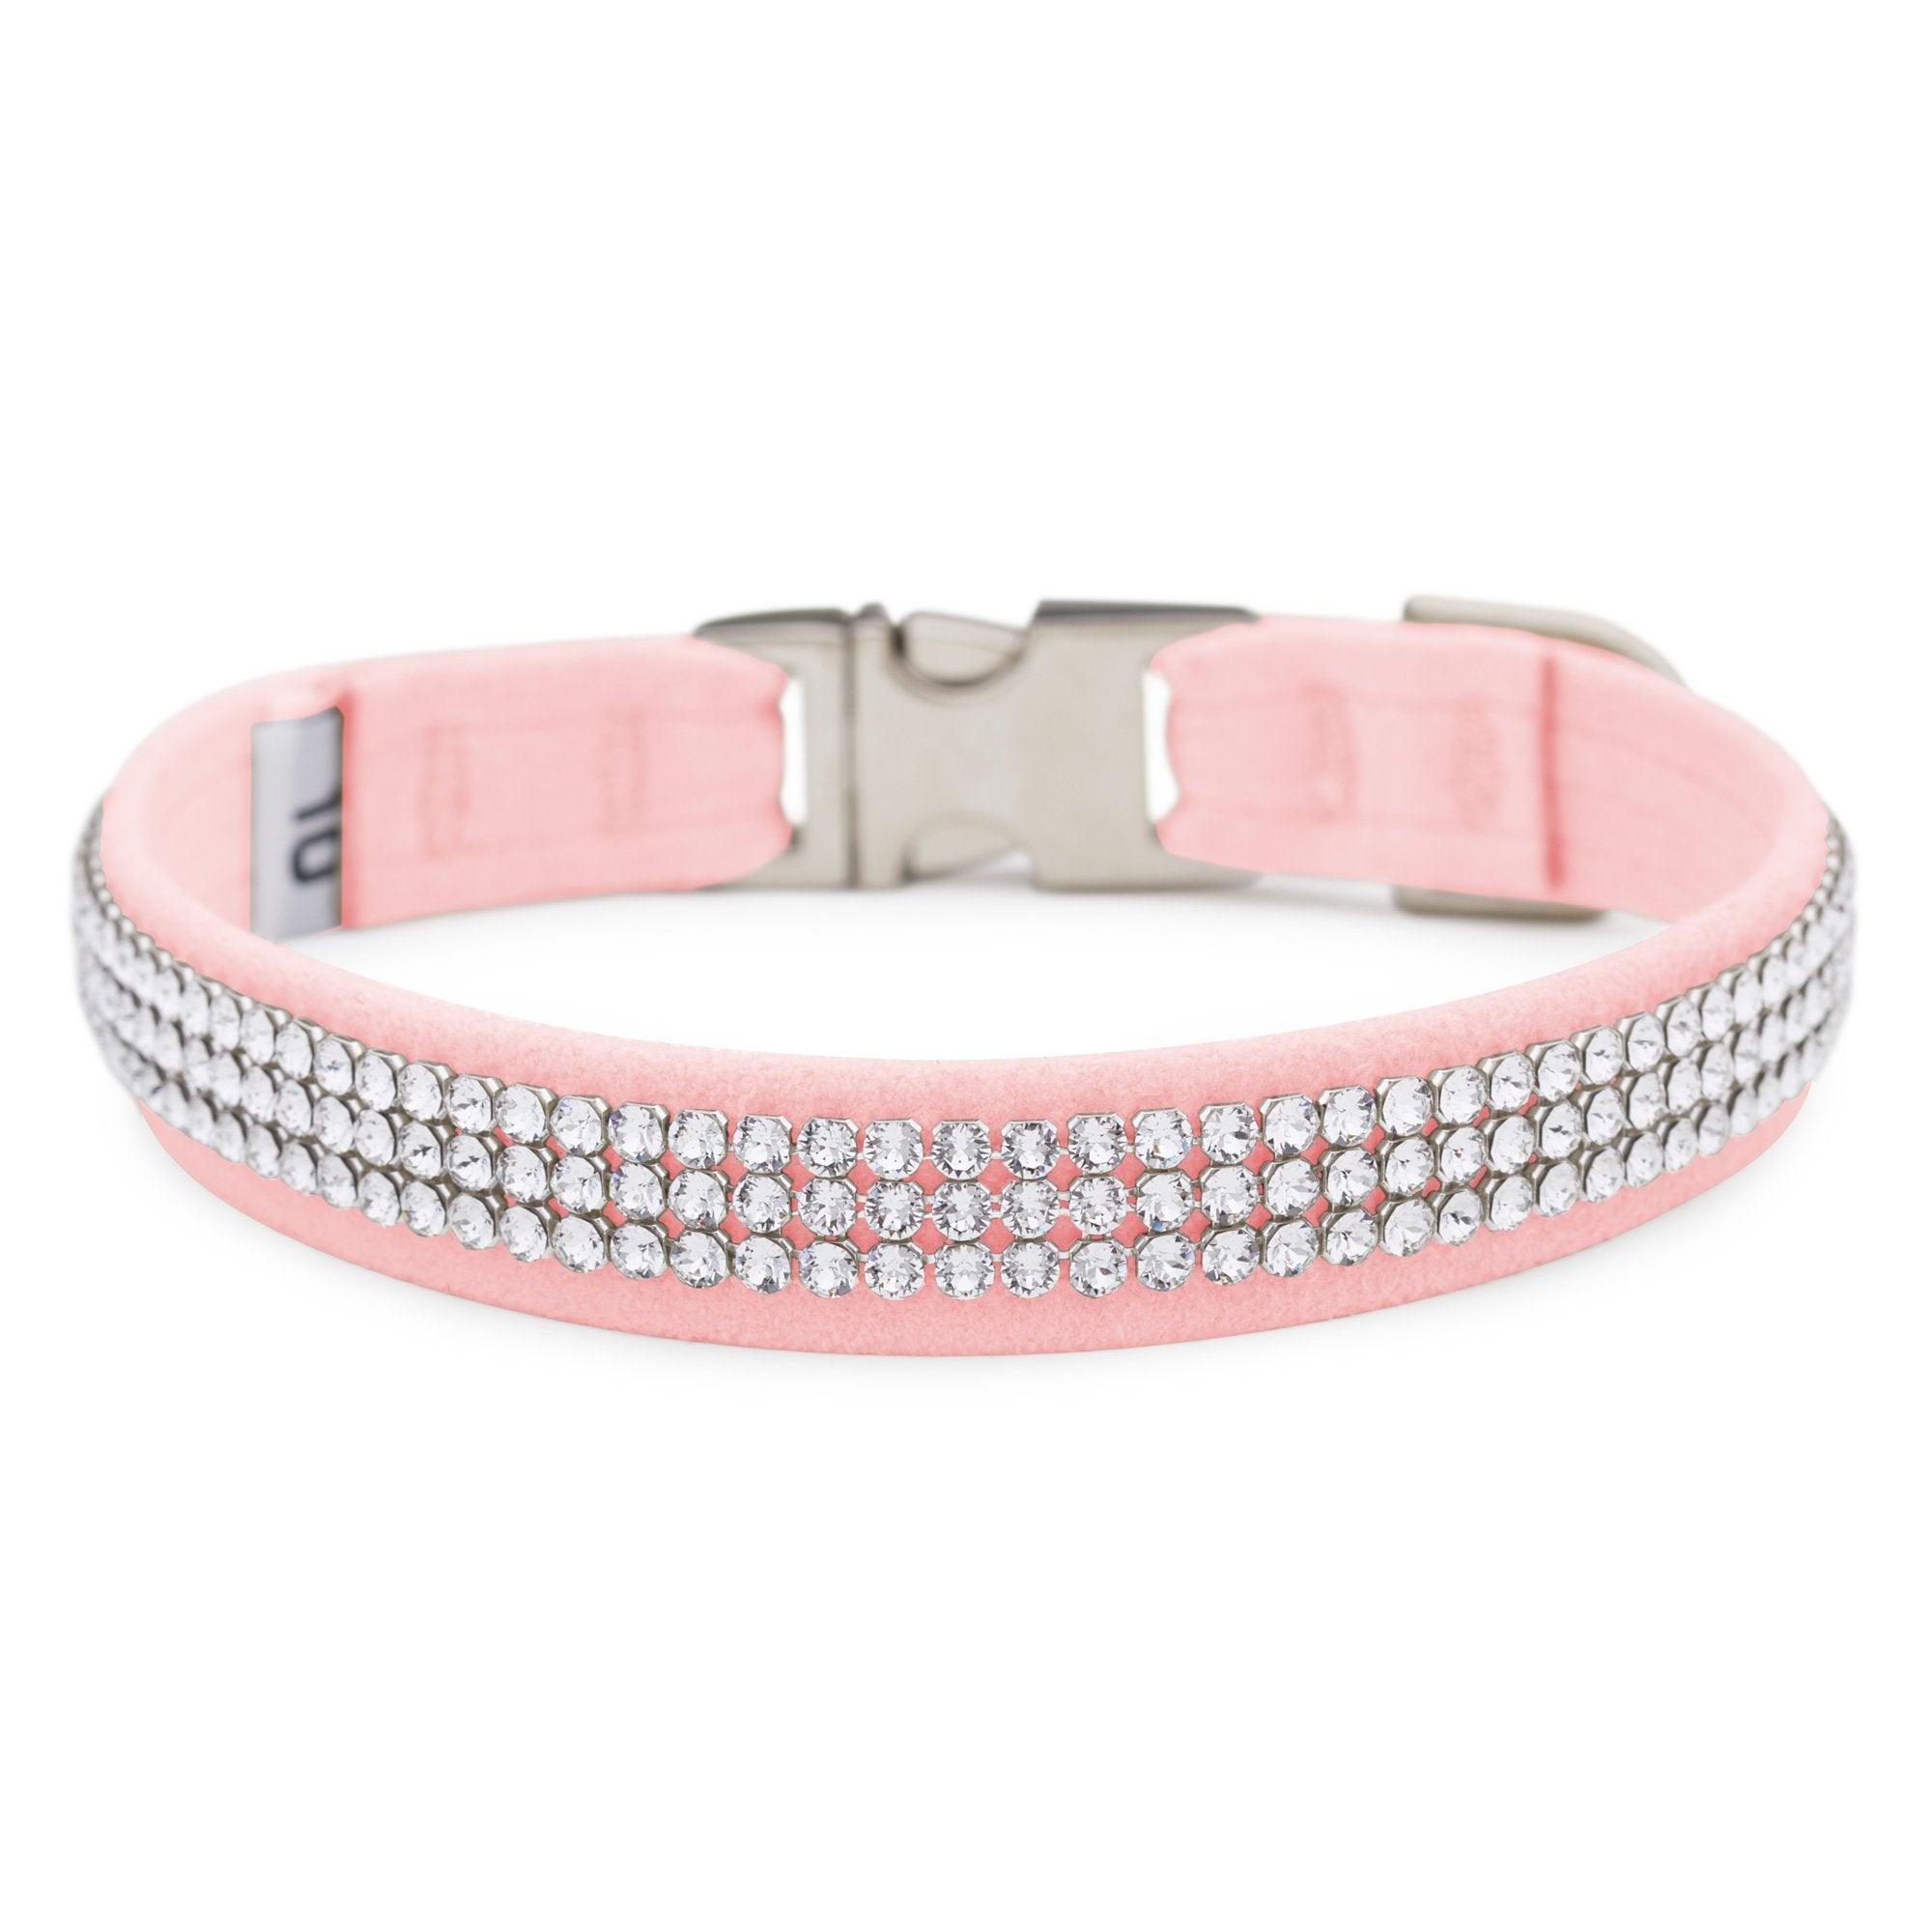 Puppy Pink 3 Row Giltmore Perfect Fit Collar - Rocky & Maggie's Pet Boutique and Salon